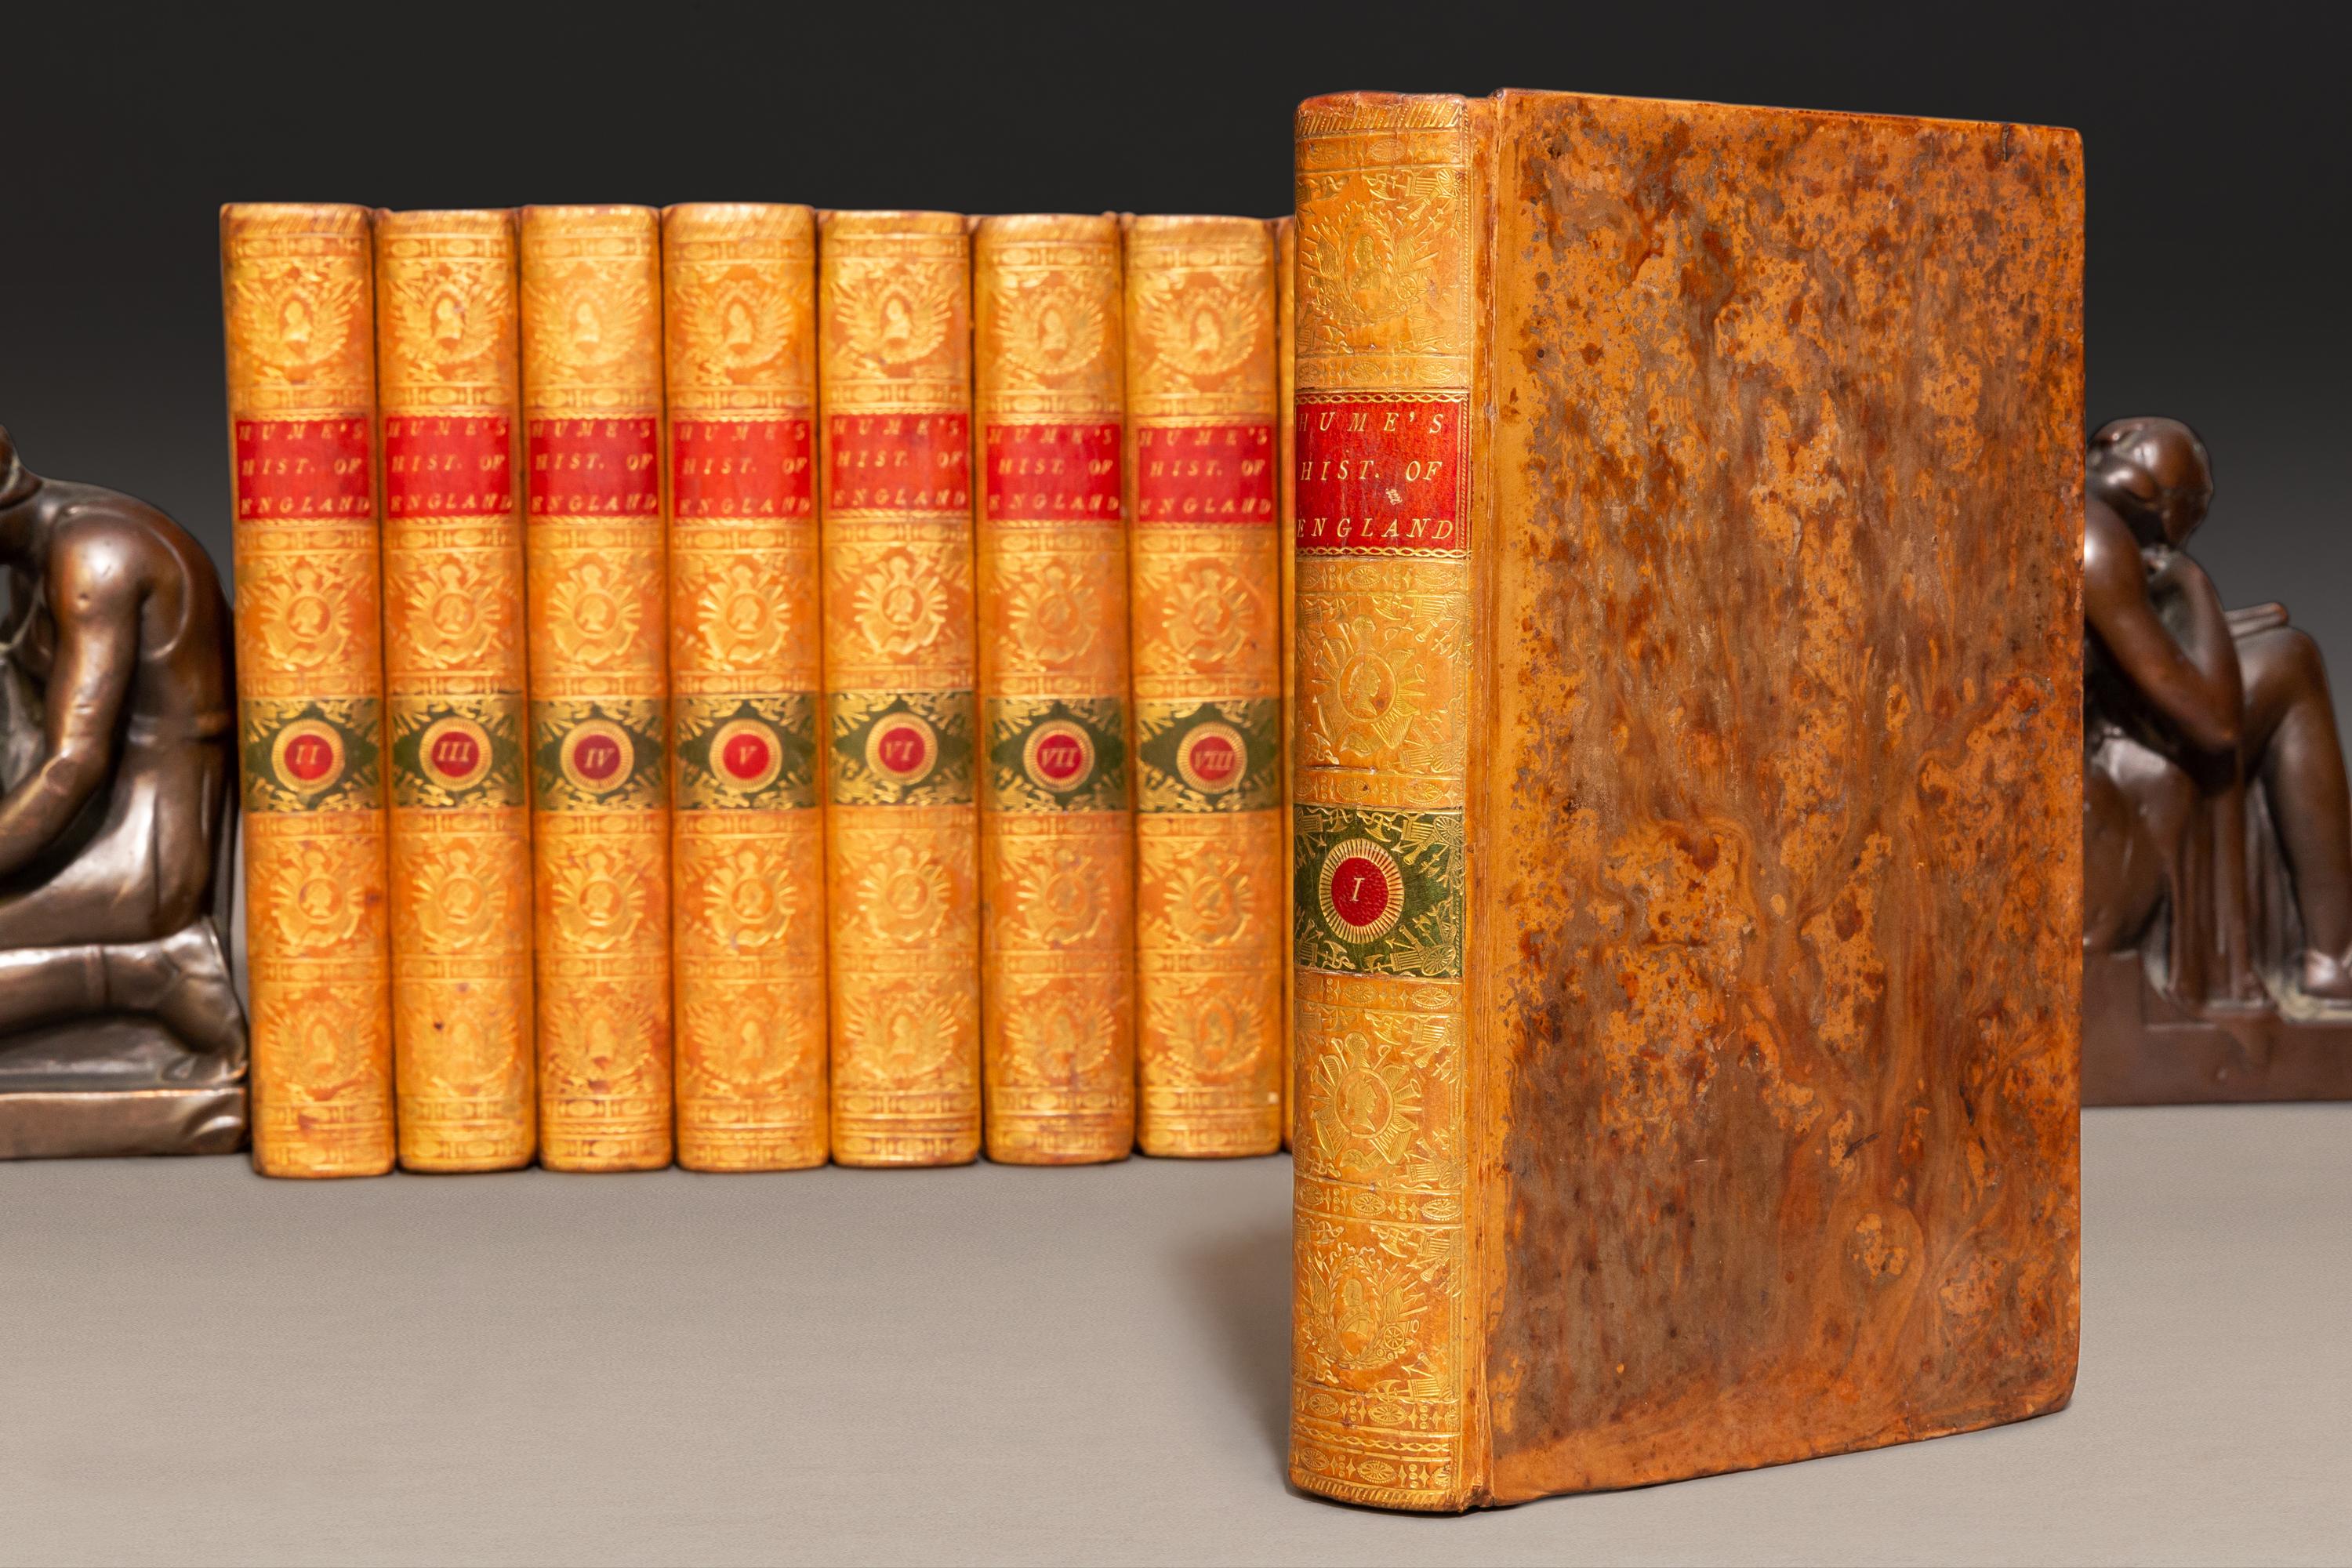 13 Volumes. David Hume & T.S.Smollett. History Of England.Bound in Full contemporary tan calf, illustrated, red and green labels, ornate gilt on spines. Published: London: T. Cadell 1789. Handsome set.